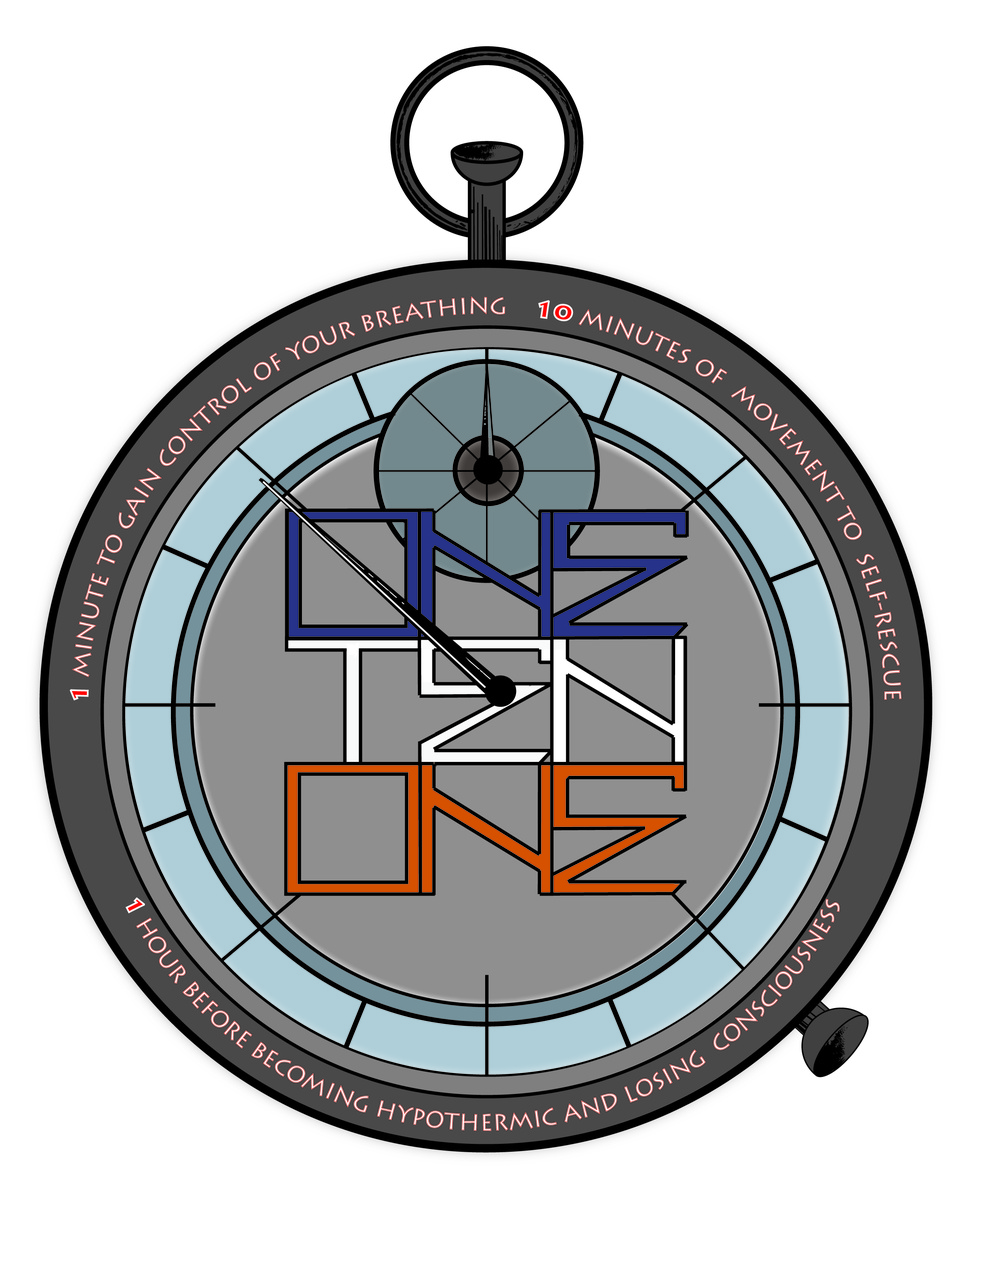 One-Ten-One cold water graphic